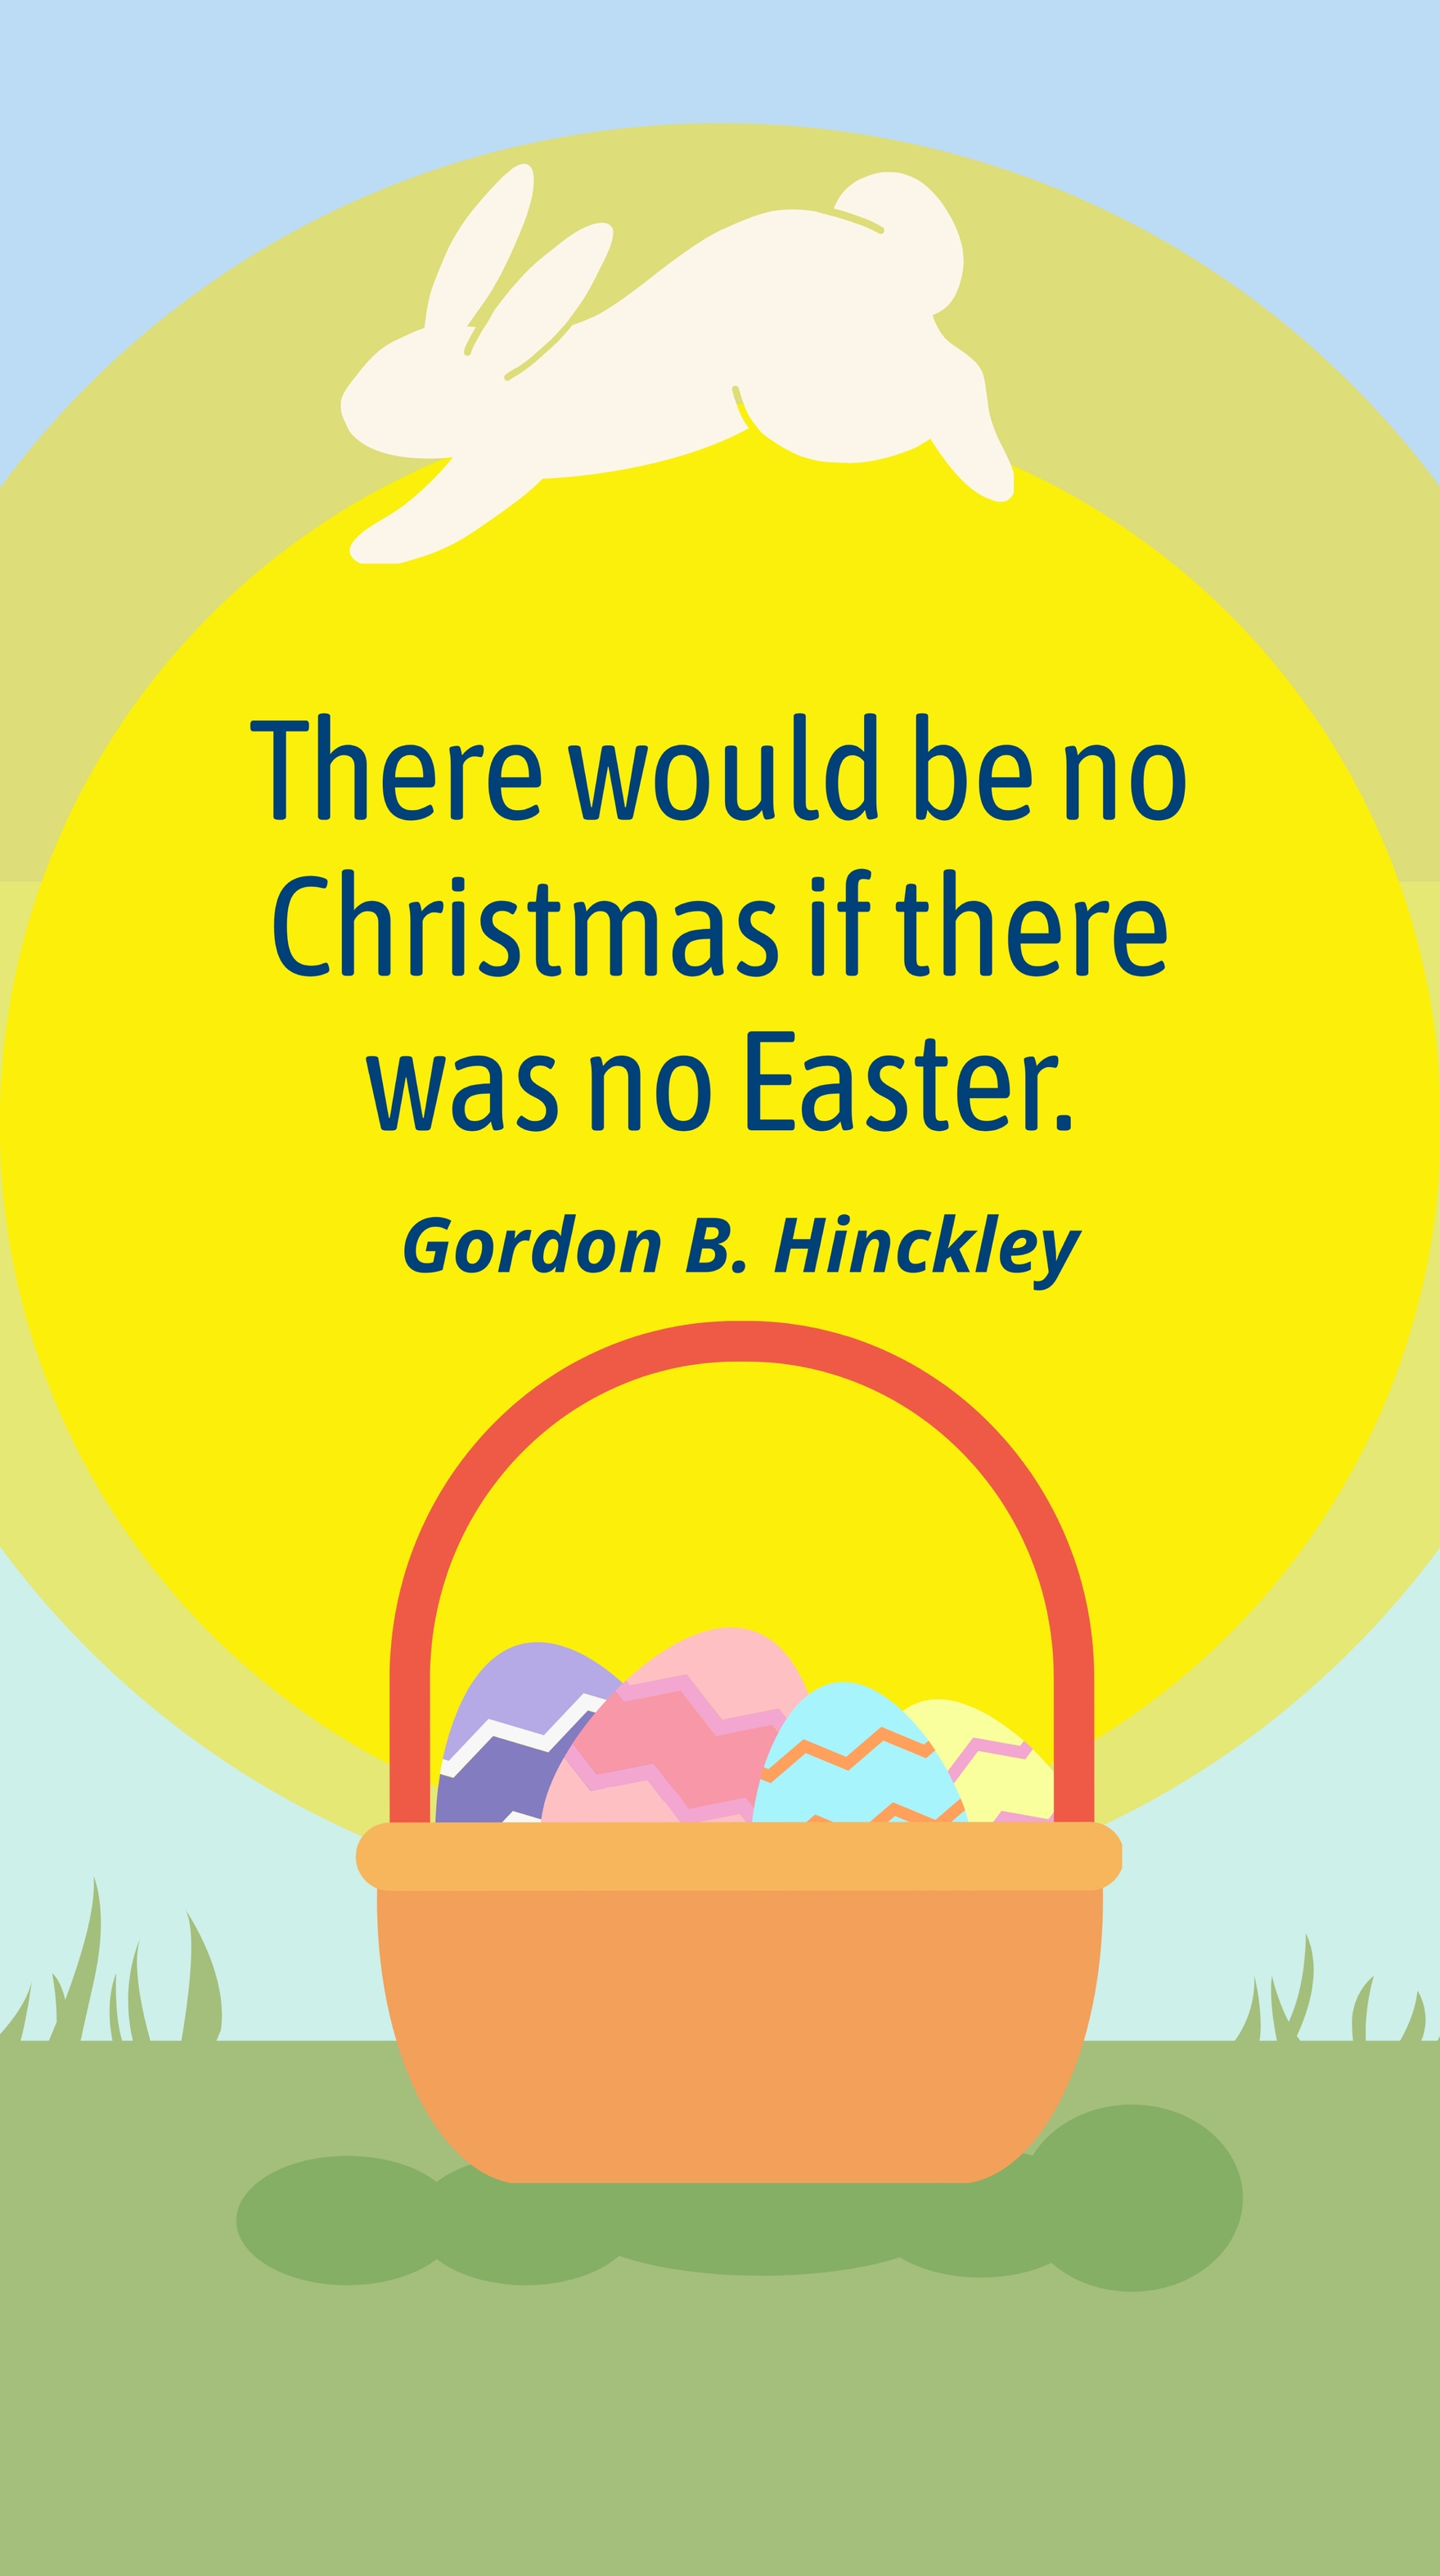 Free Gordon B. Hinckley - There would be no Christmas if there was no Easter. in JPG